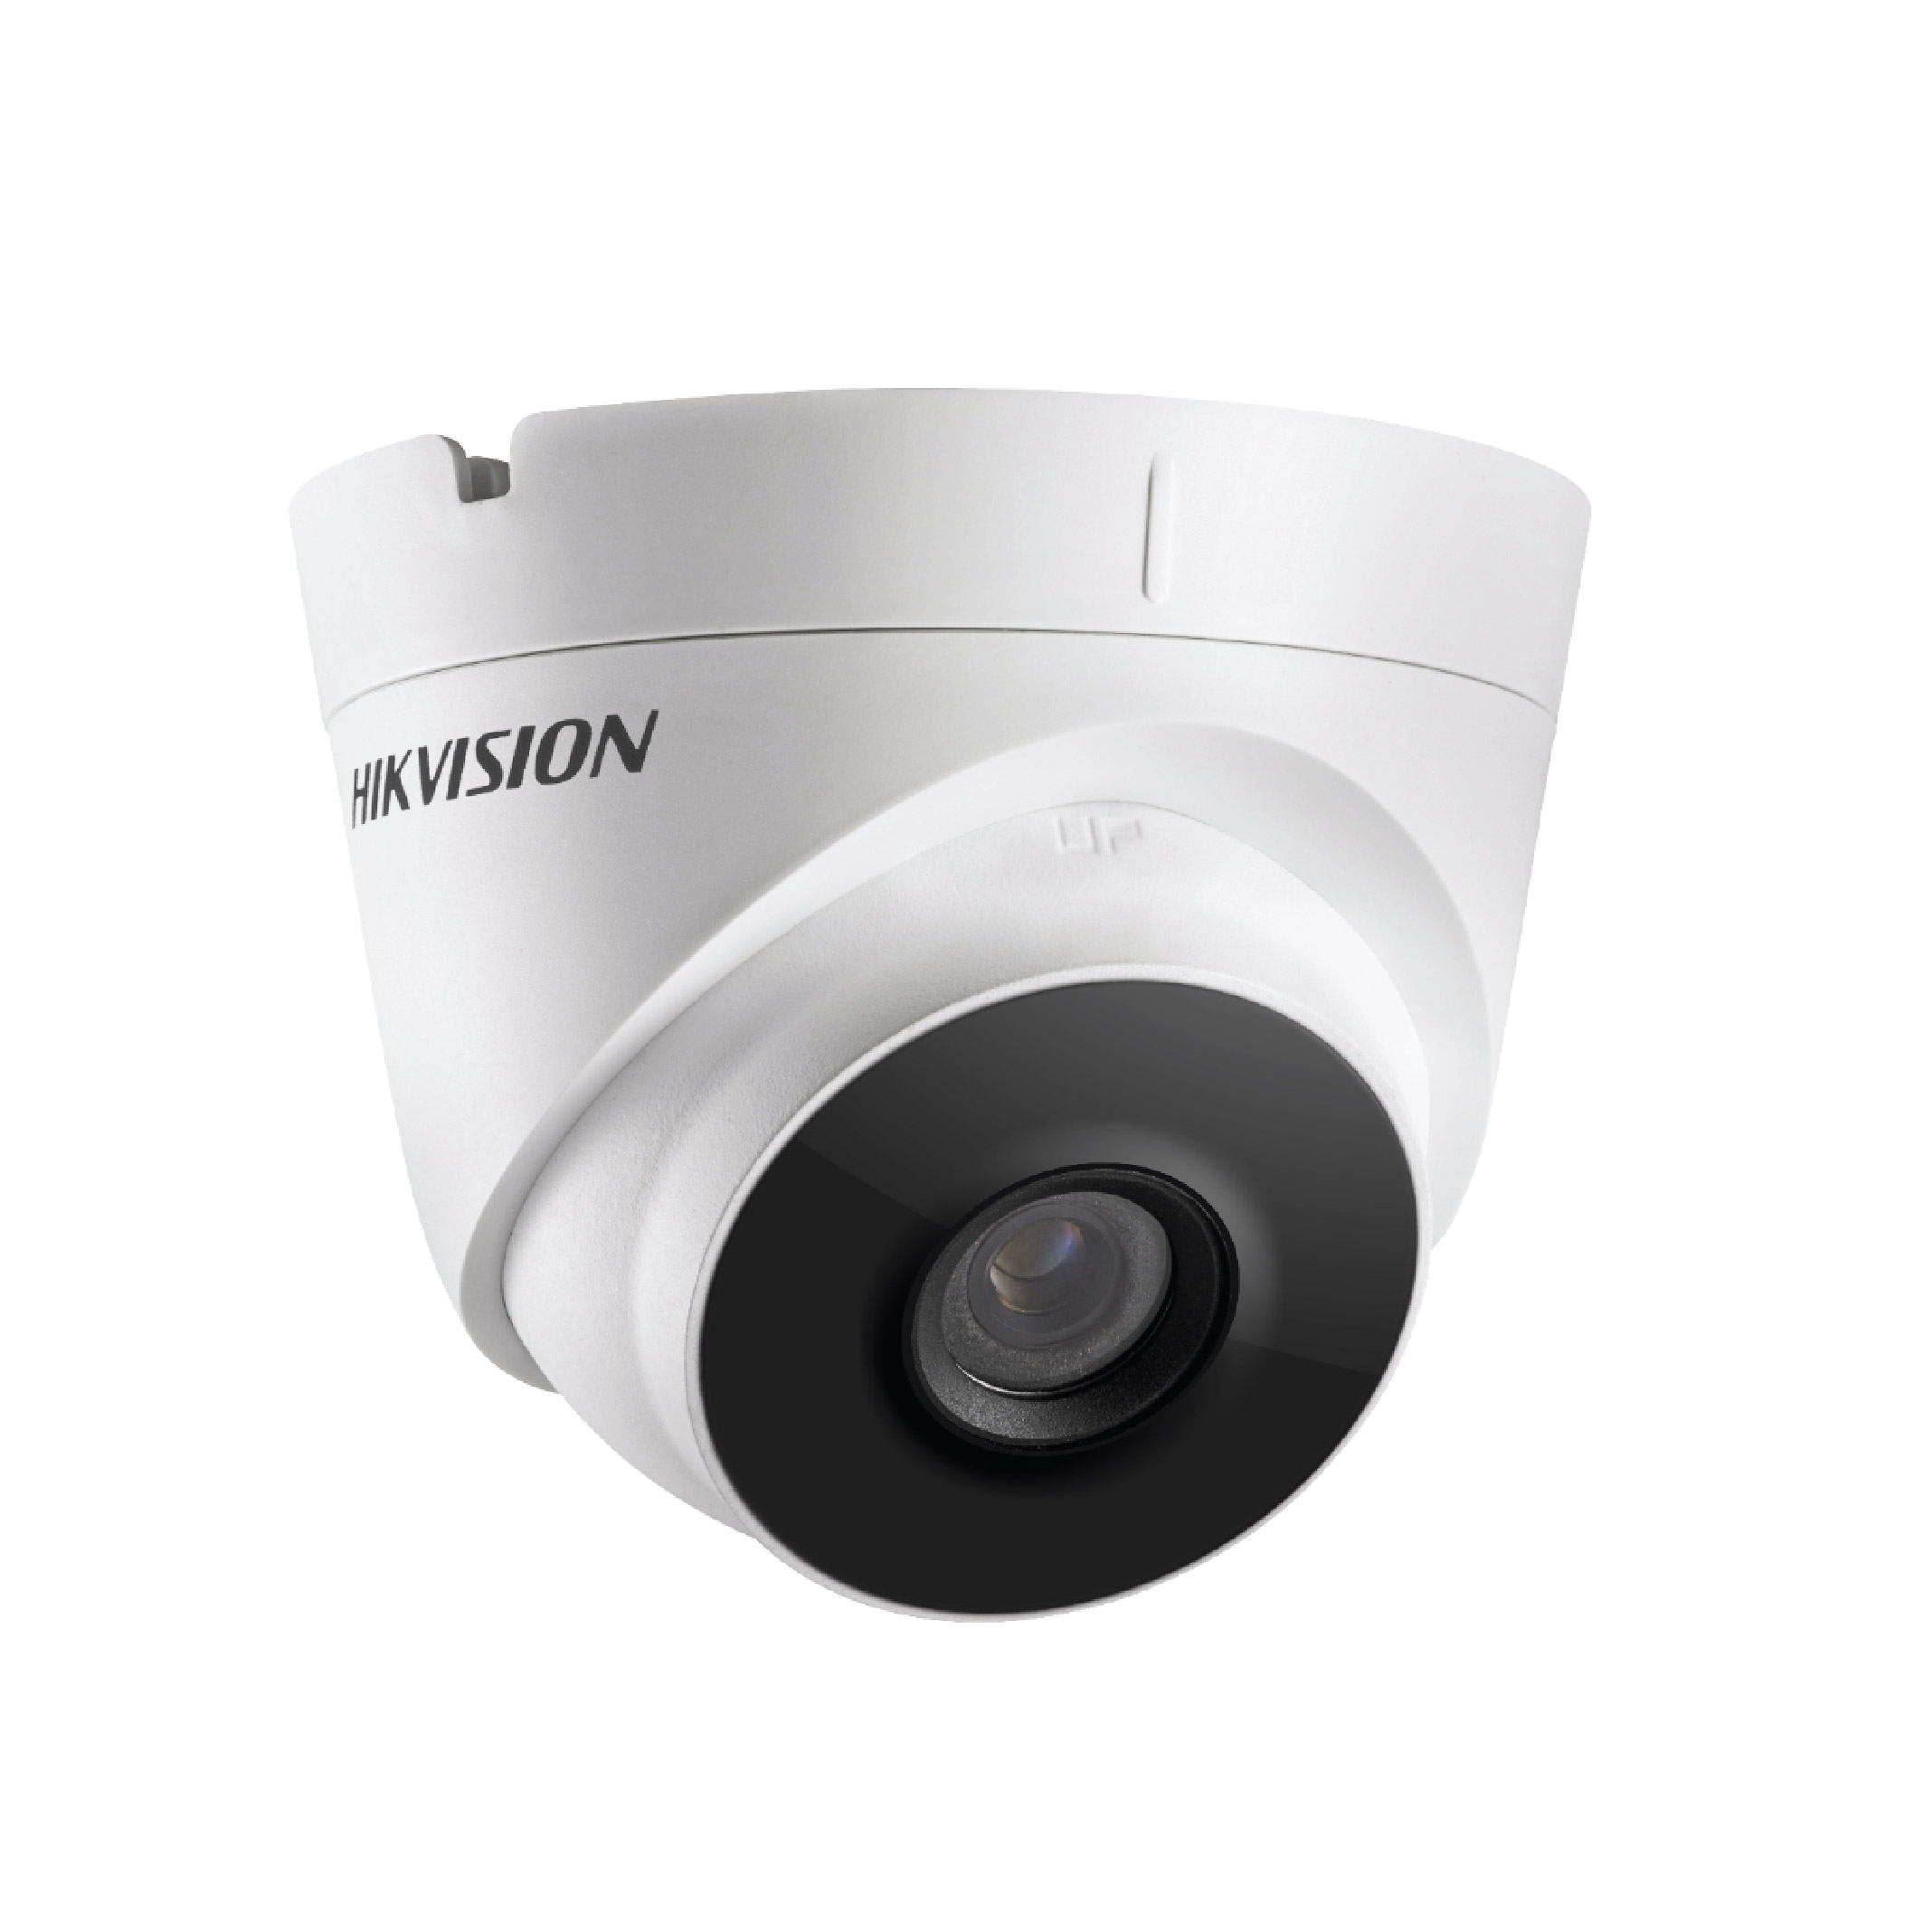 HIKVISION DS-2CE56H0T-IT3F Turbo HD Camera